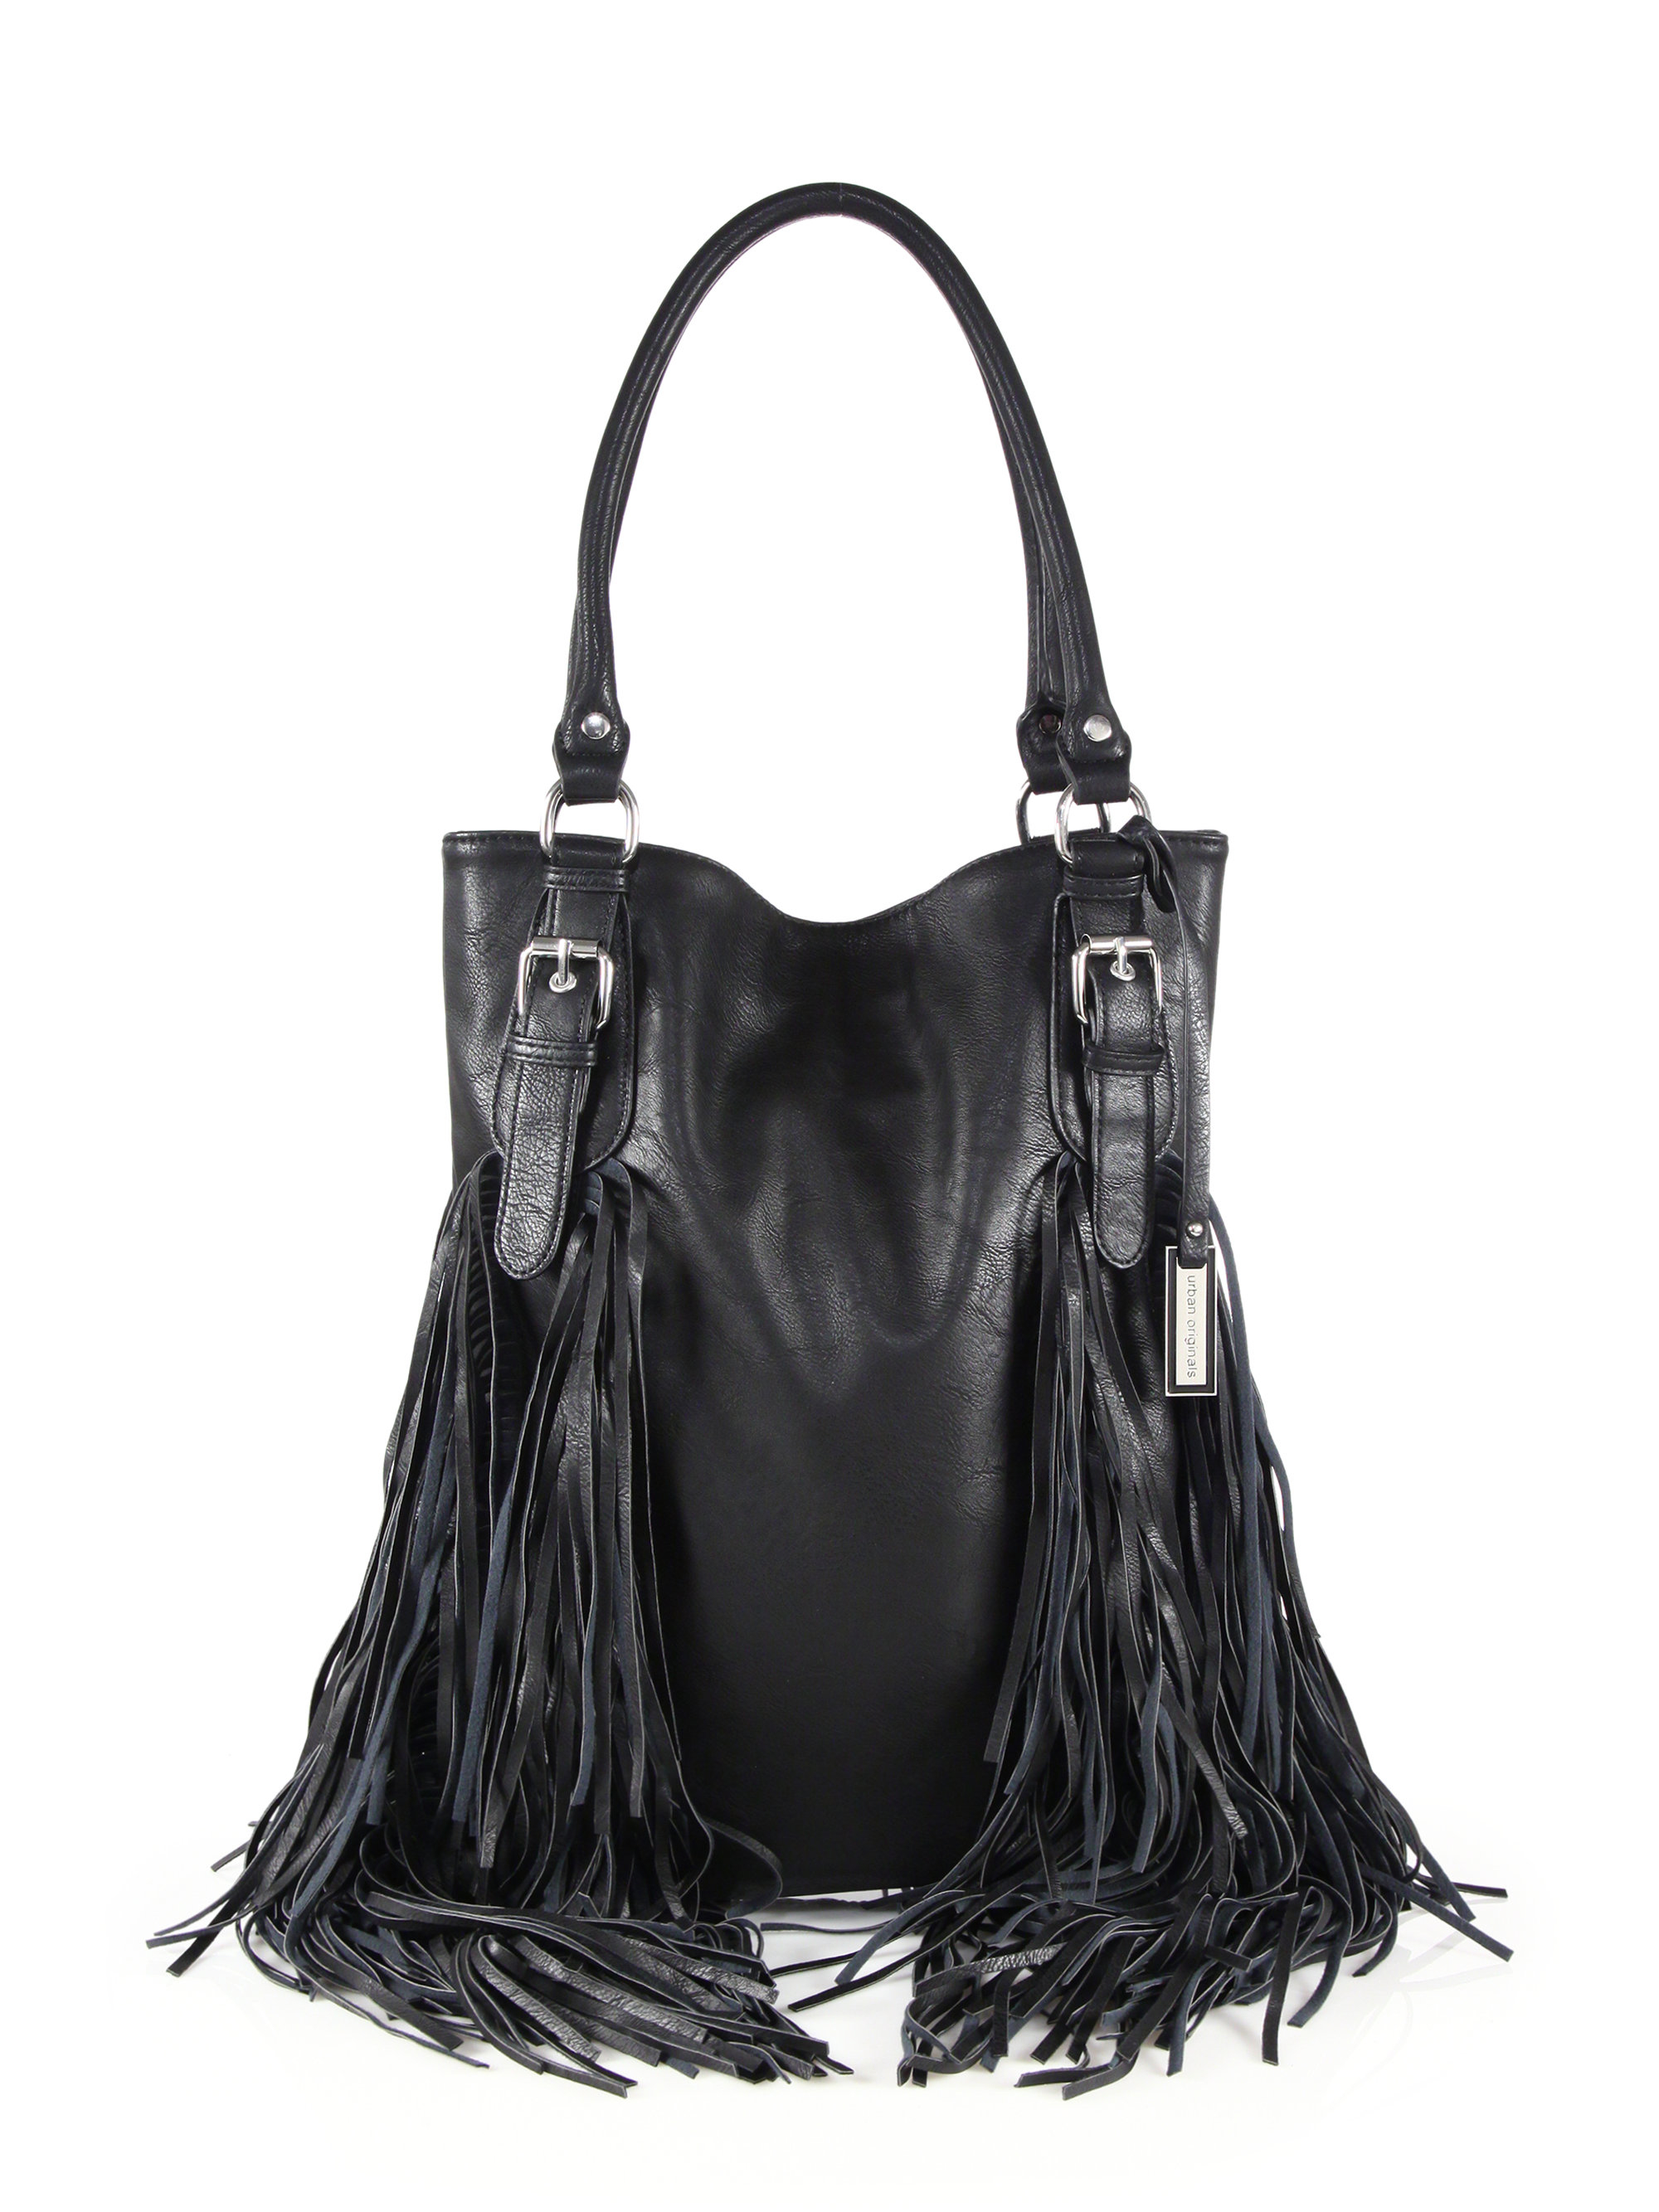 Lyst - Urban Originals Crazy Heart Fringed Faux Leather Tote in Black